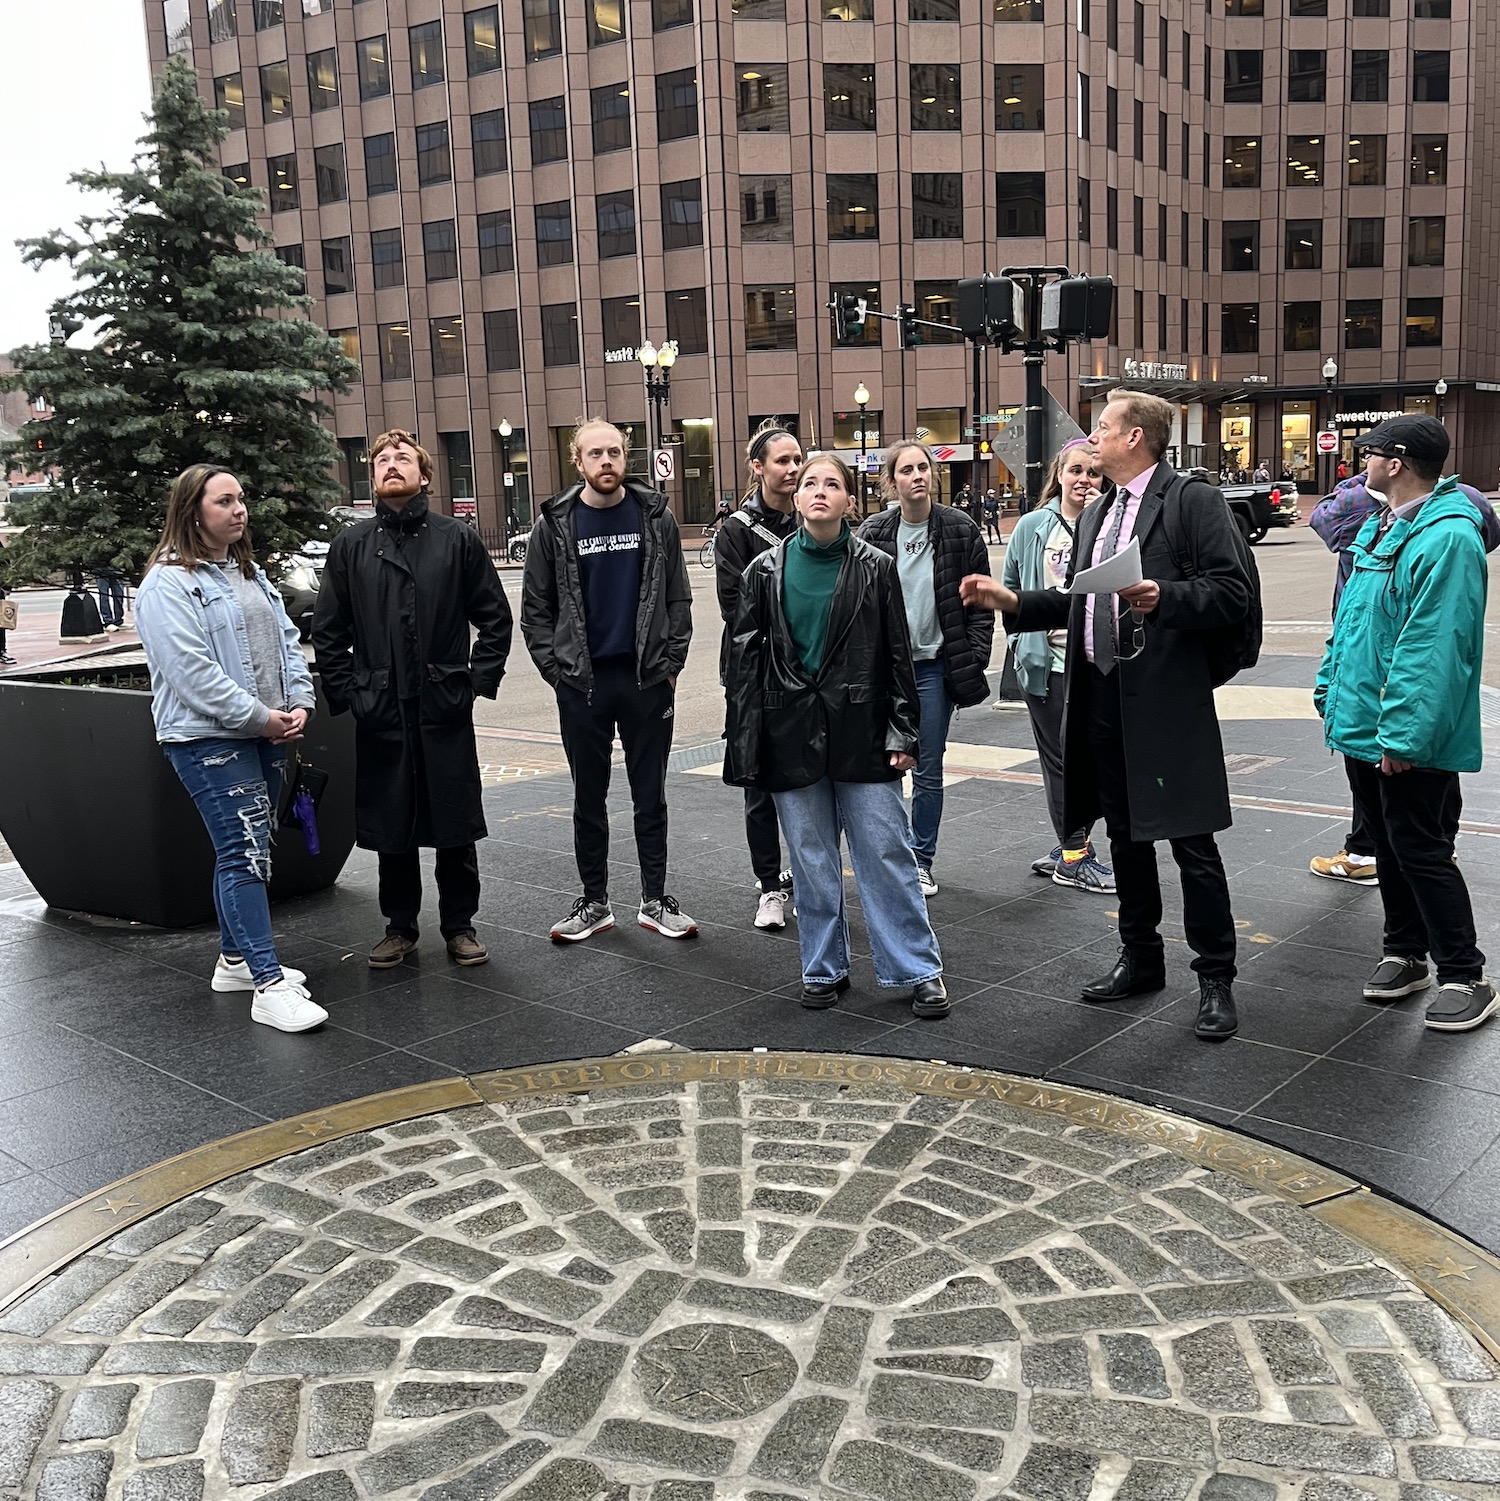 LCU students gather around a cobblestone circle in a city square, around which a plaque reads: Site of the Boston Massacre. The professor is giving a lecture.